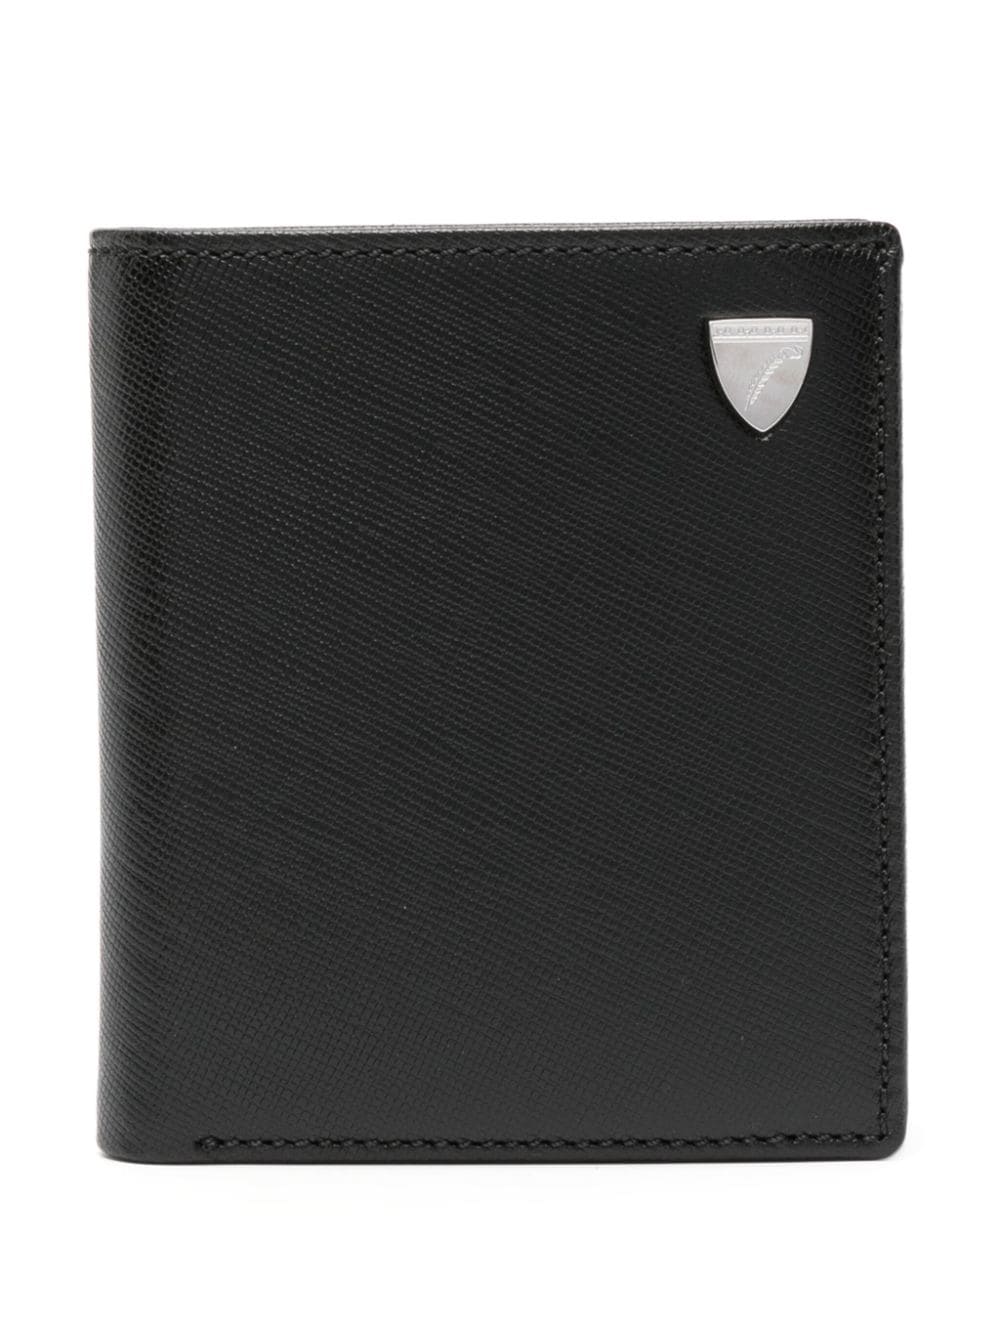 Aspinal Of London logo-plaque leather wallet - Black von Aspinal Of London